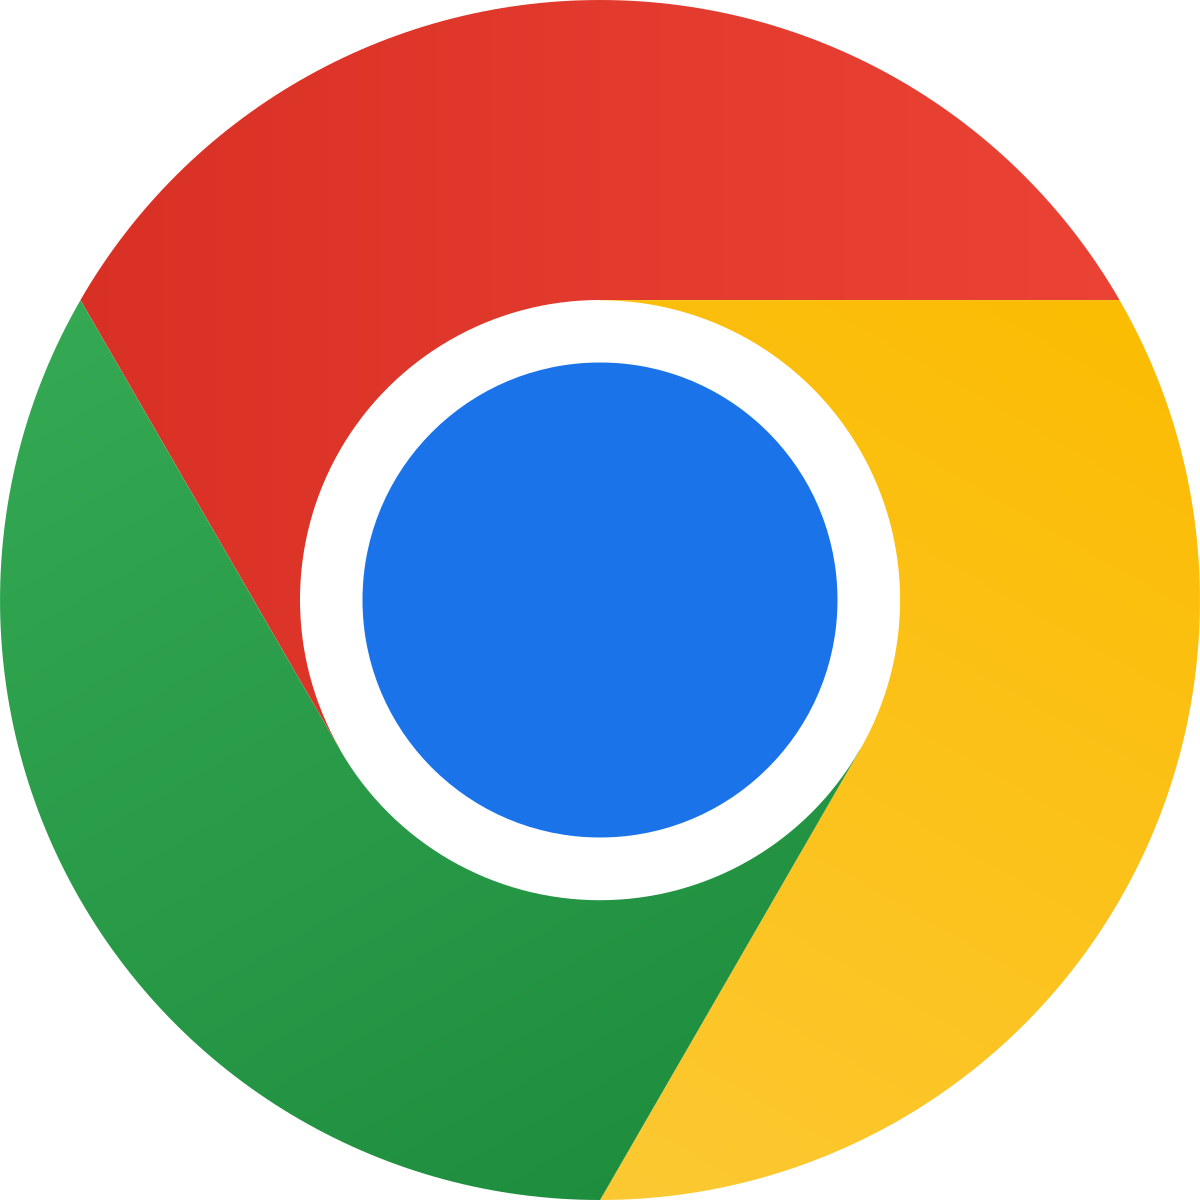 Update Google Chrome to the latest version.
Update extensions to their latest versions.